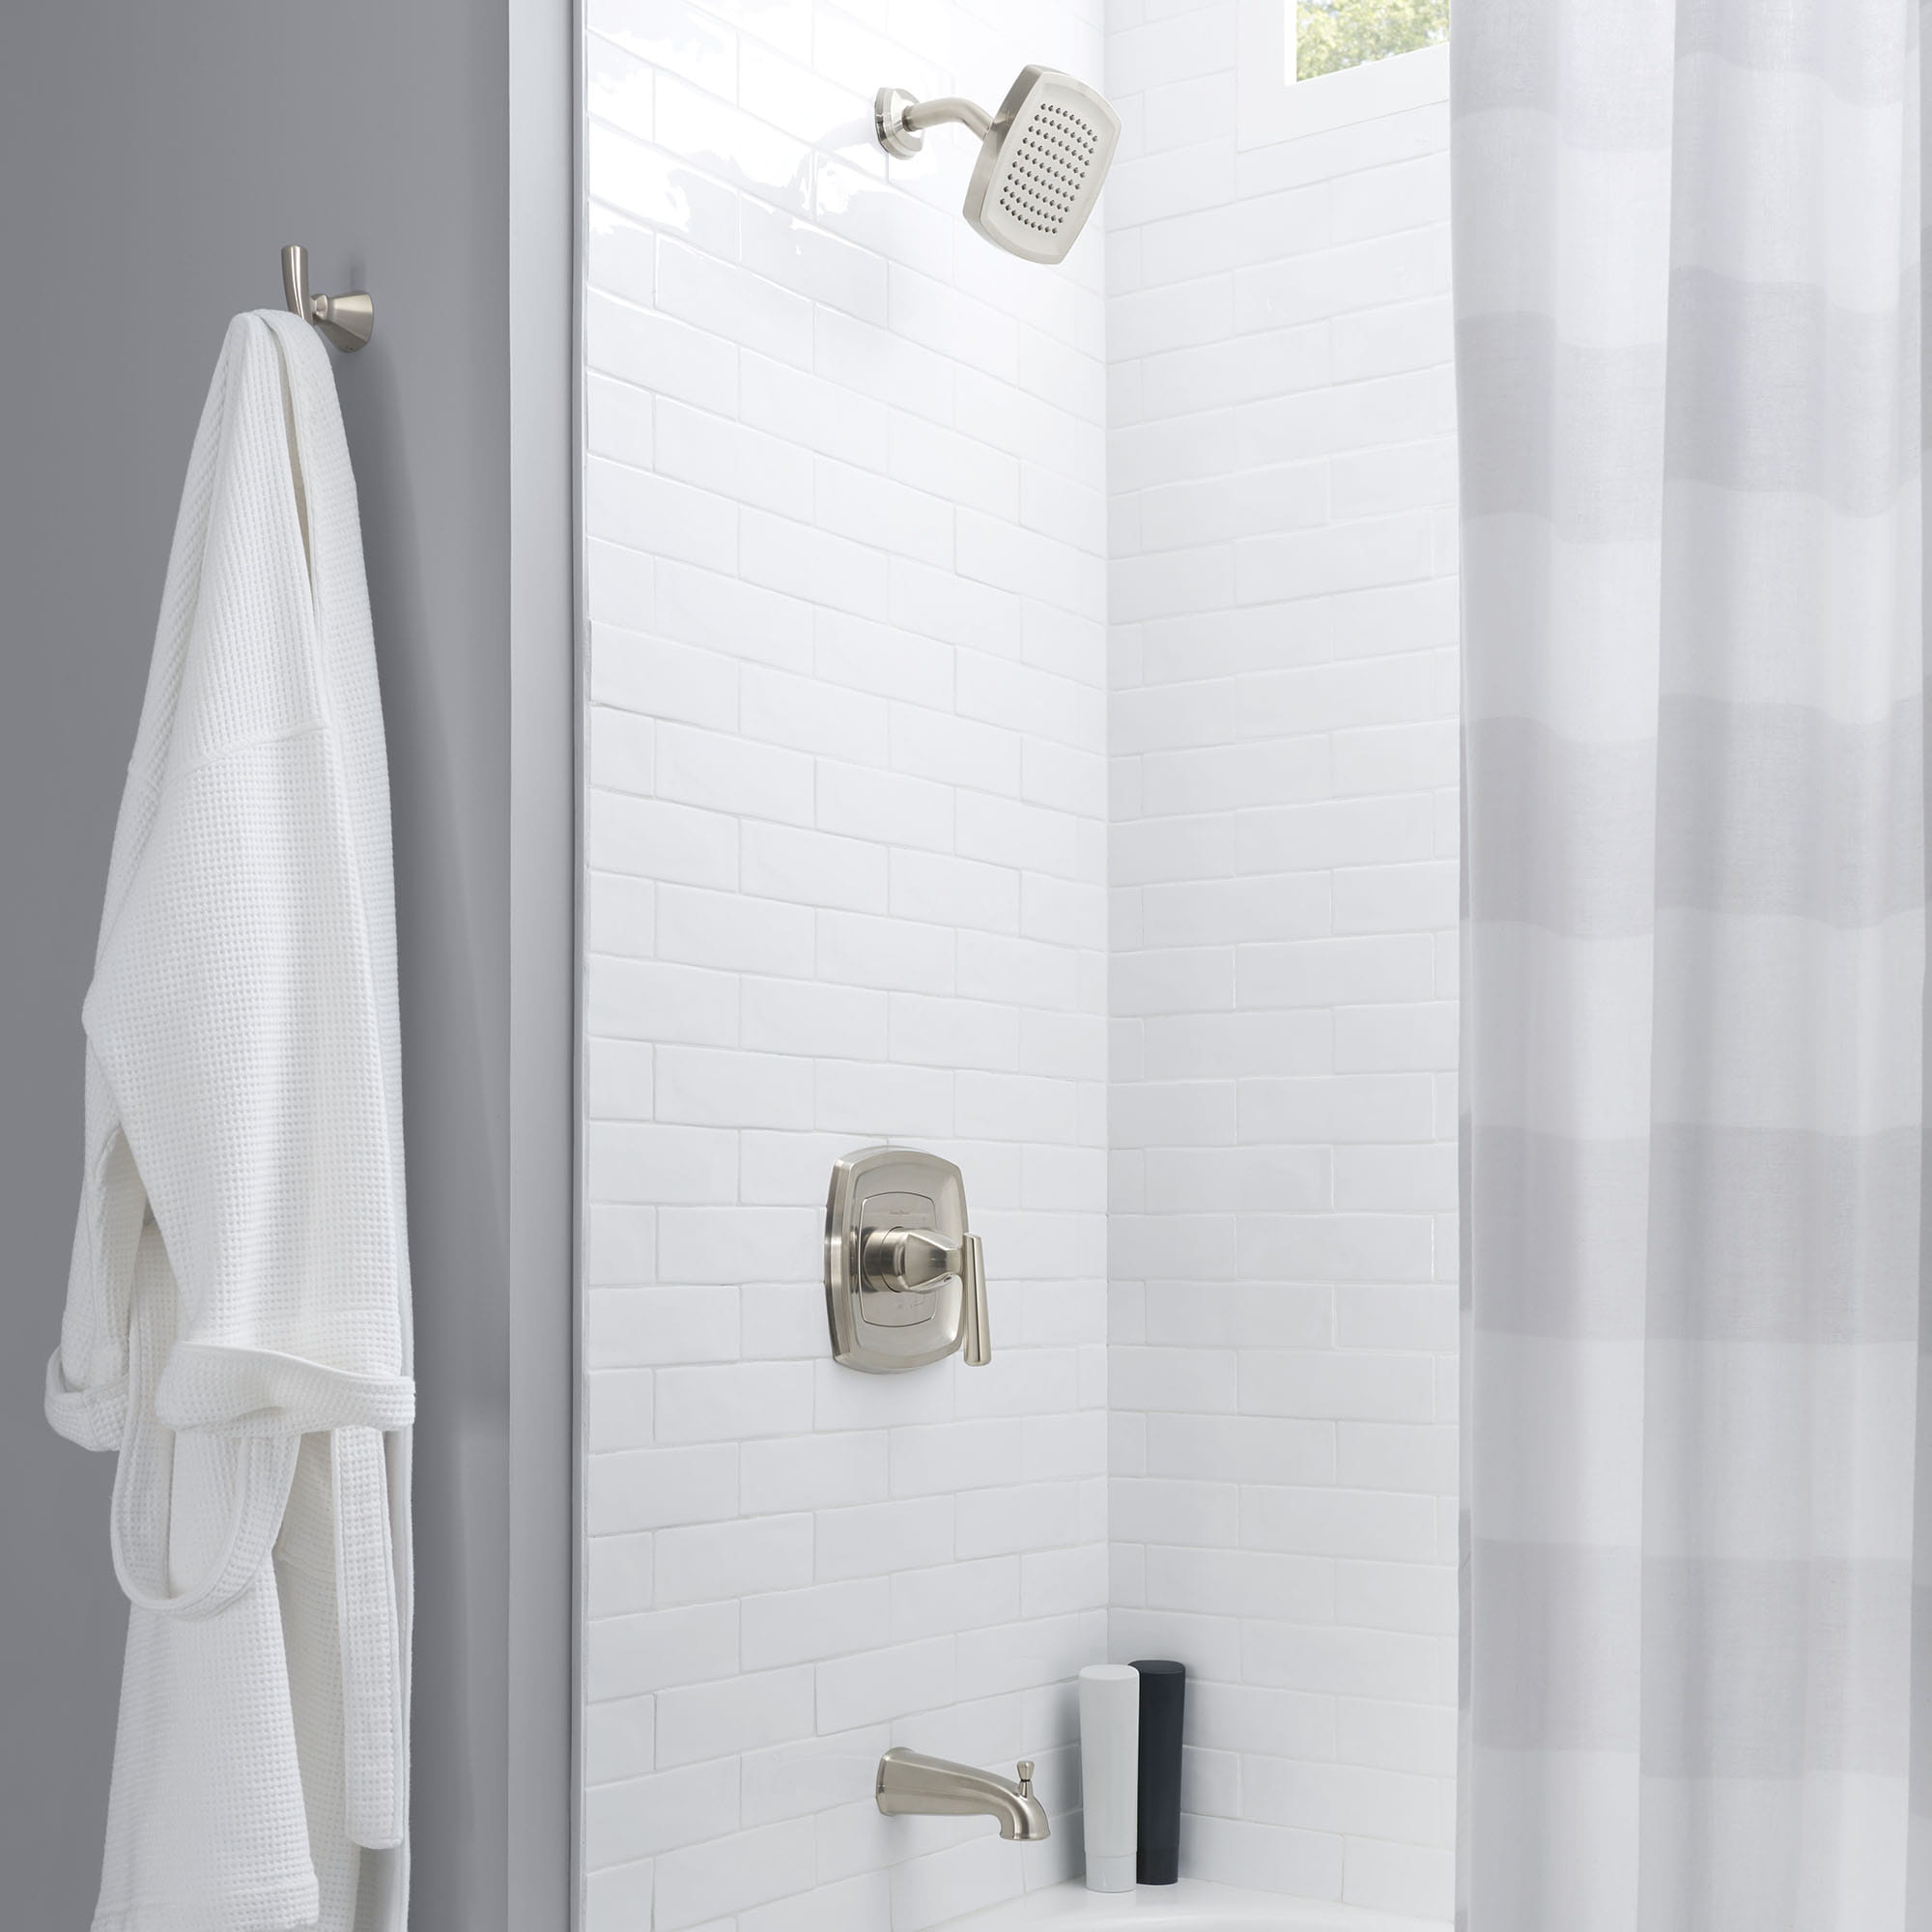 Edgemere 25 gpm 95 L min Tub and Shower Trim Kit With Showerhead Double Ceramic Pressure Balance Cartridge With Lever Handle   BRUSHED NICKEL